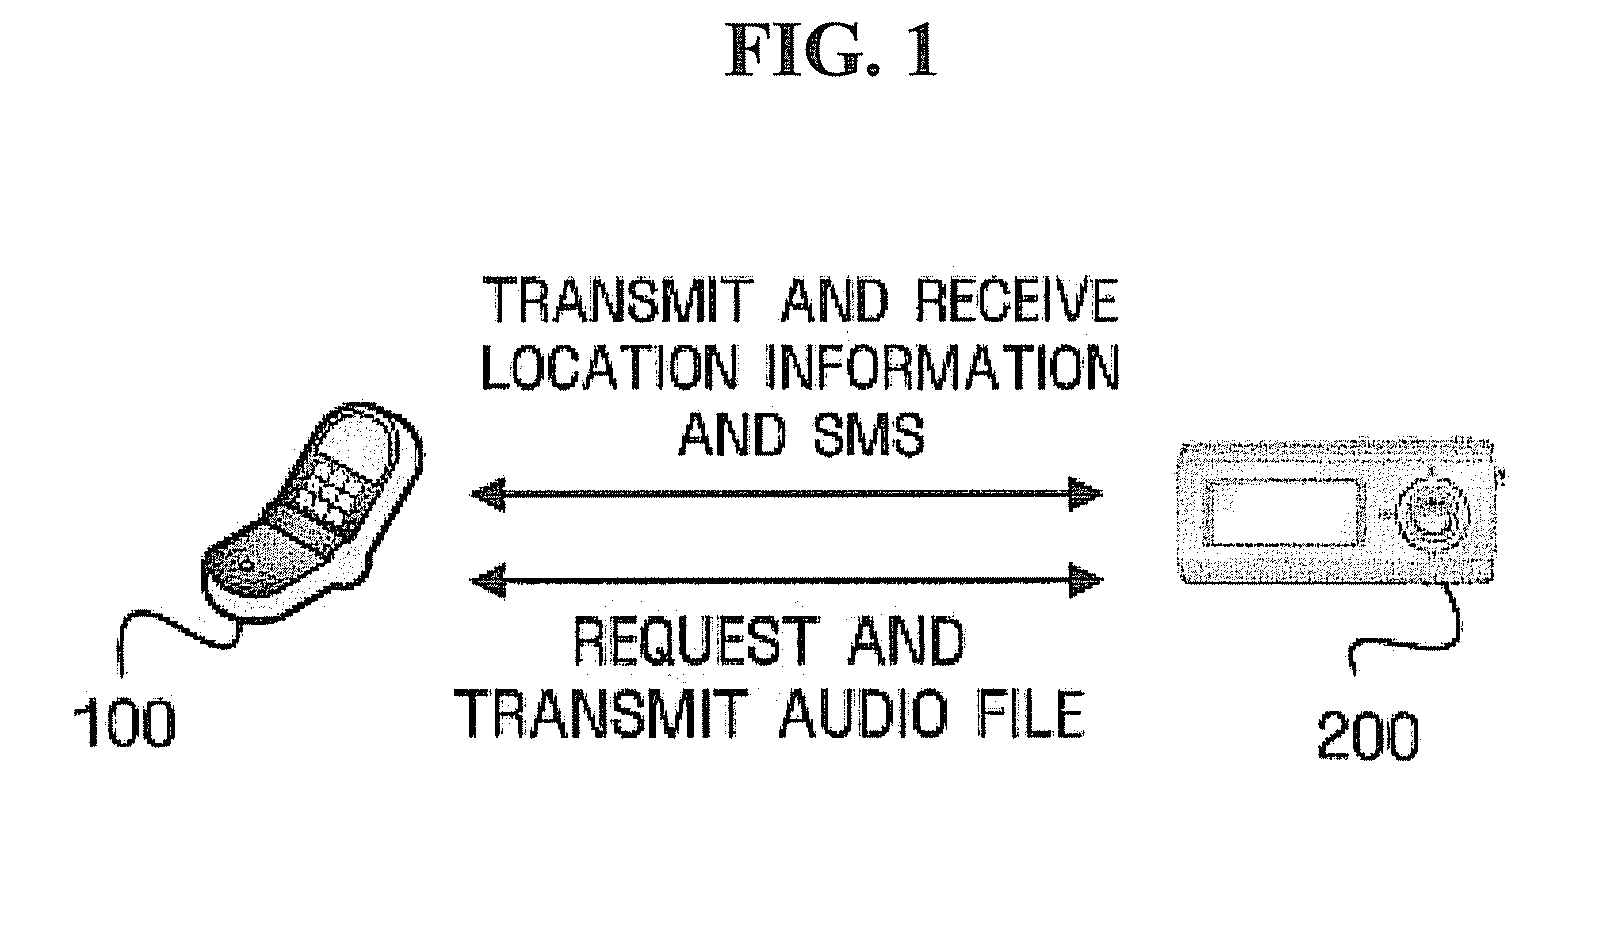 System and method for playing audio file according to received location information